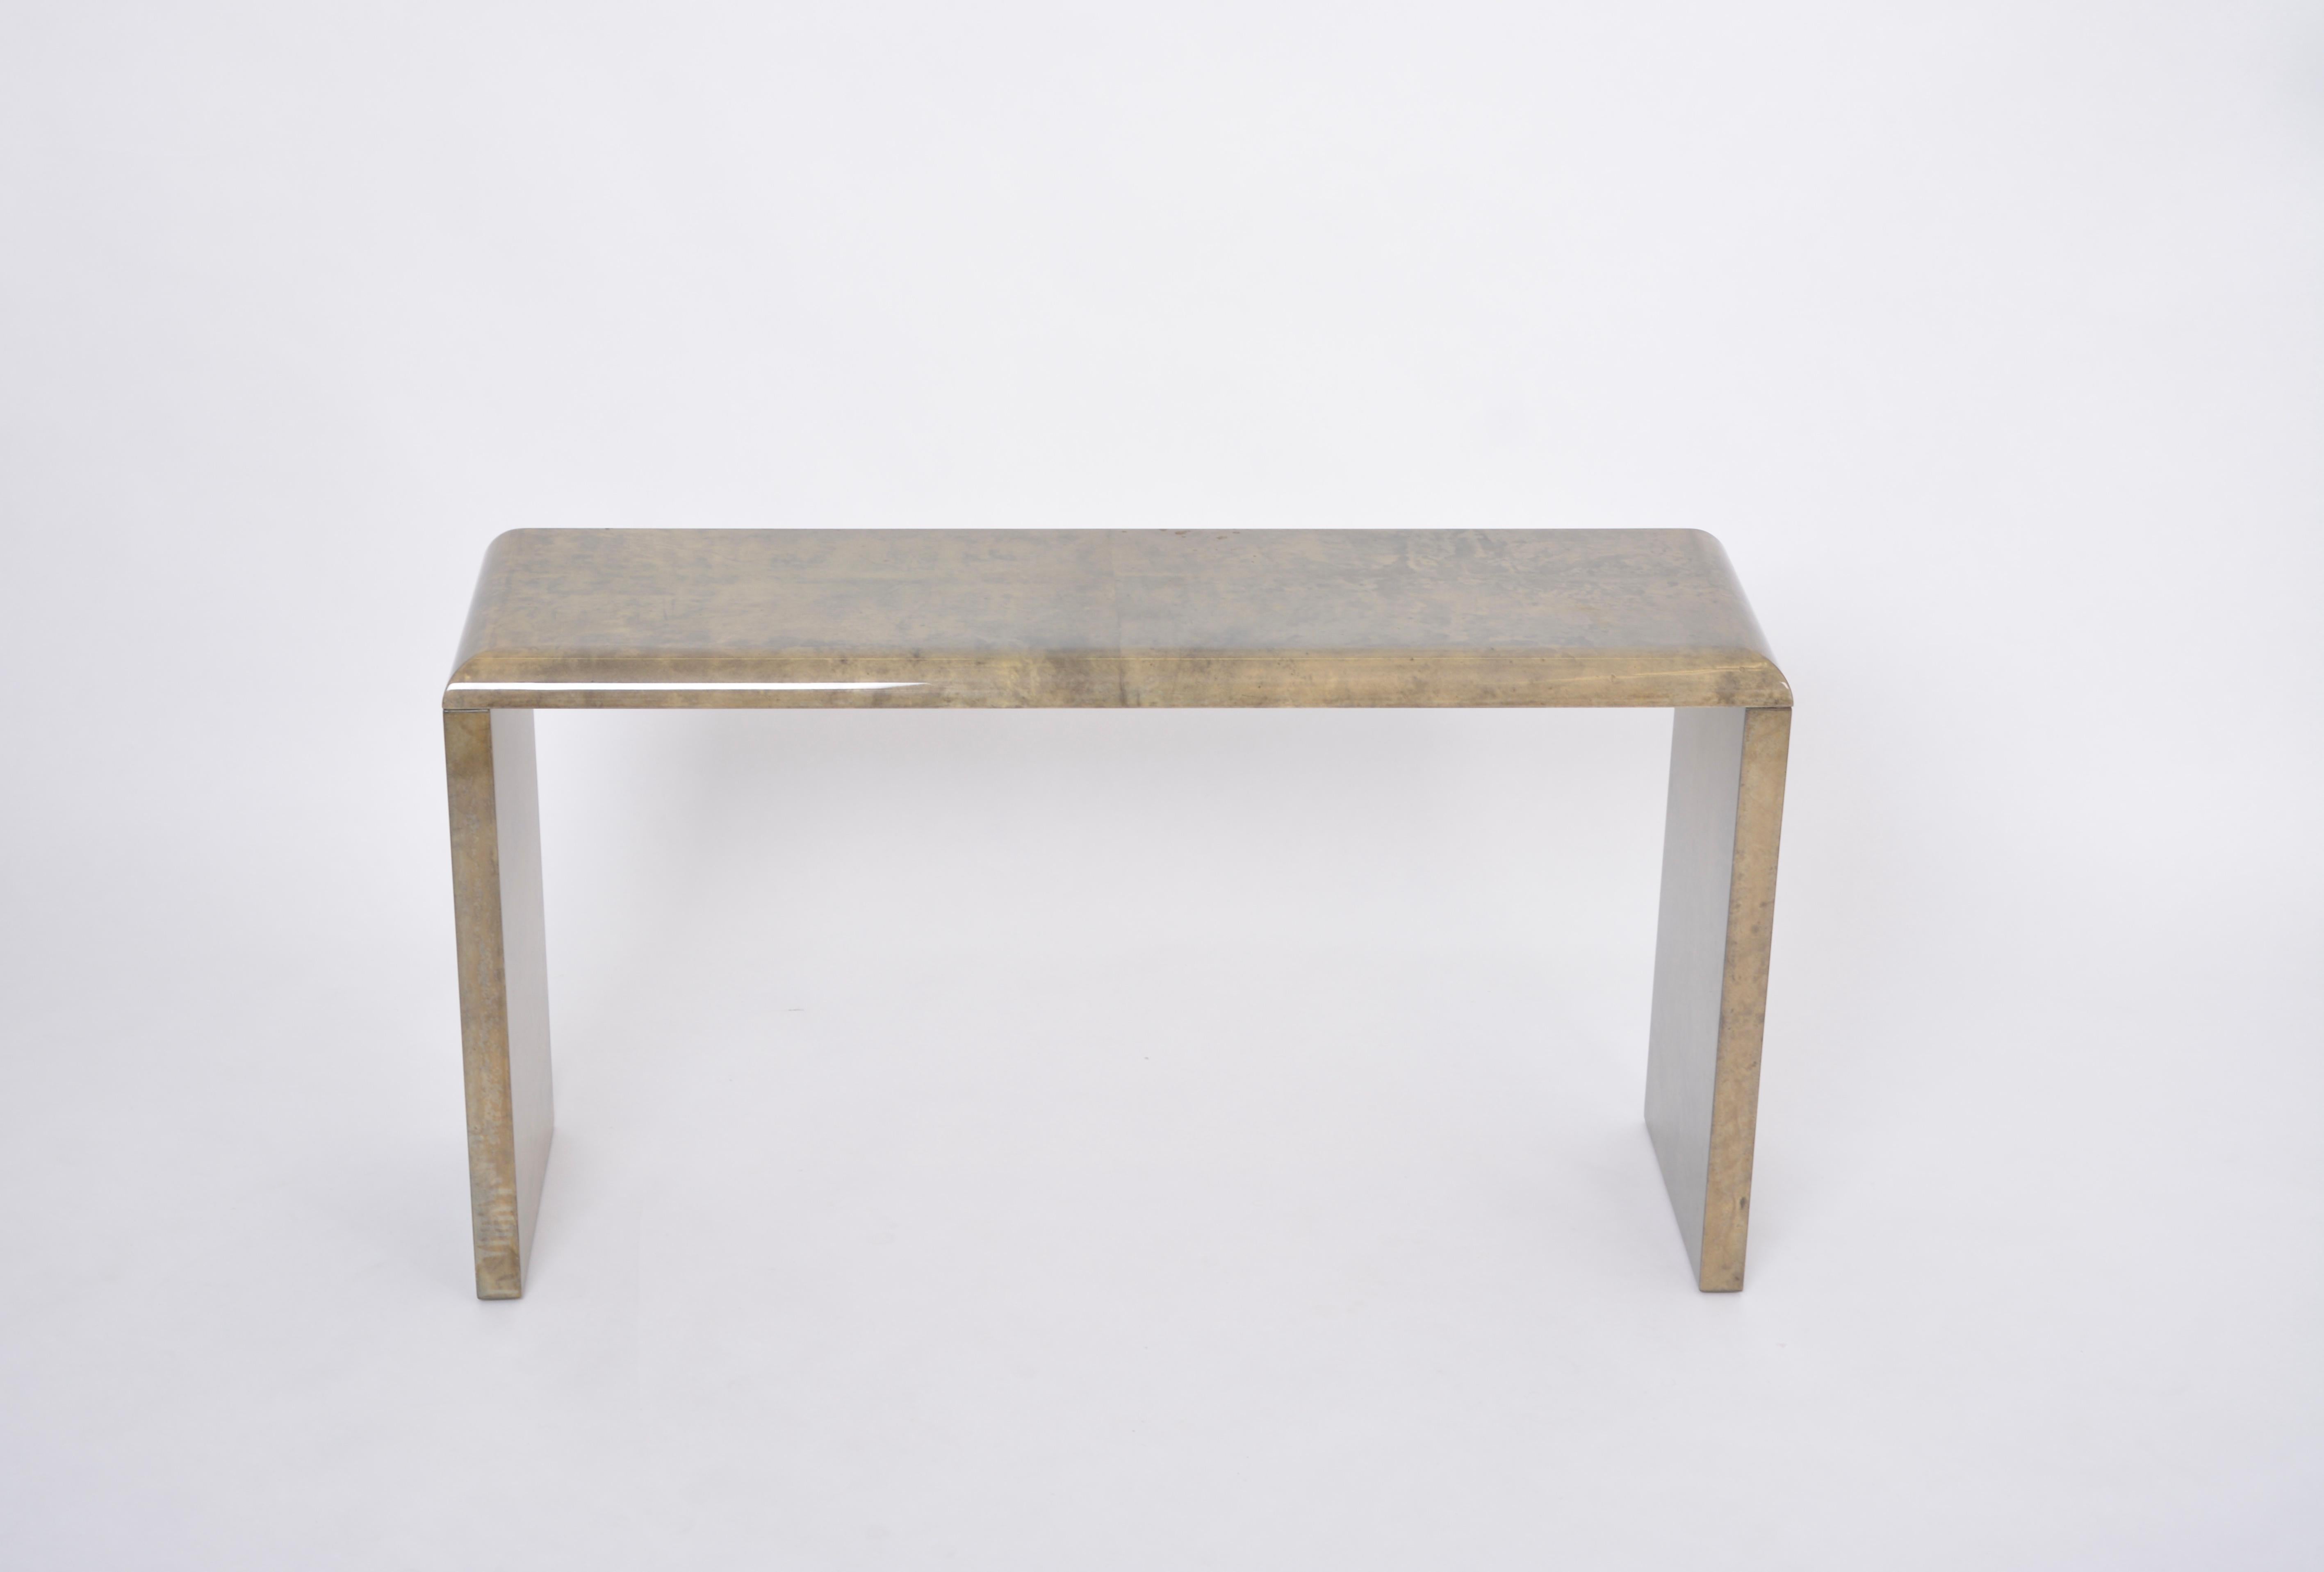 Lacquered Mid-Century Modern Console Table Made of Laquered Goat Skin by Aldo Tura